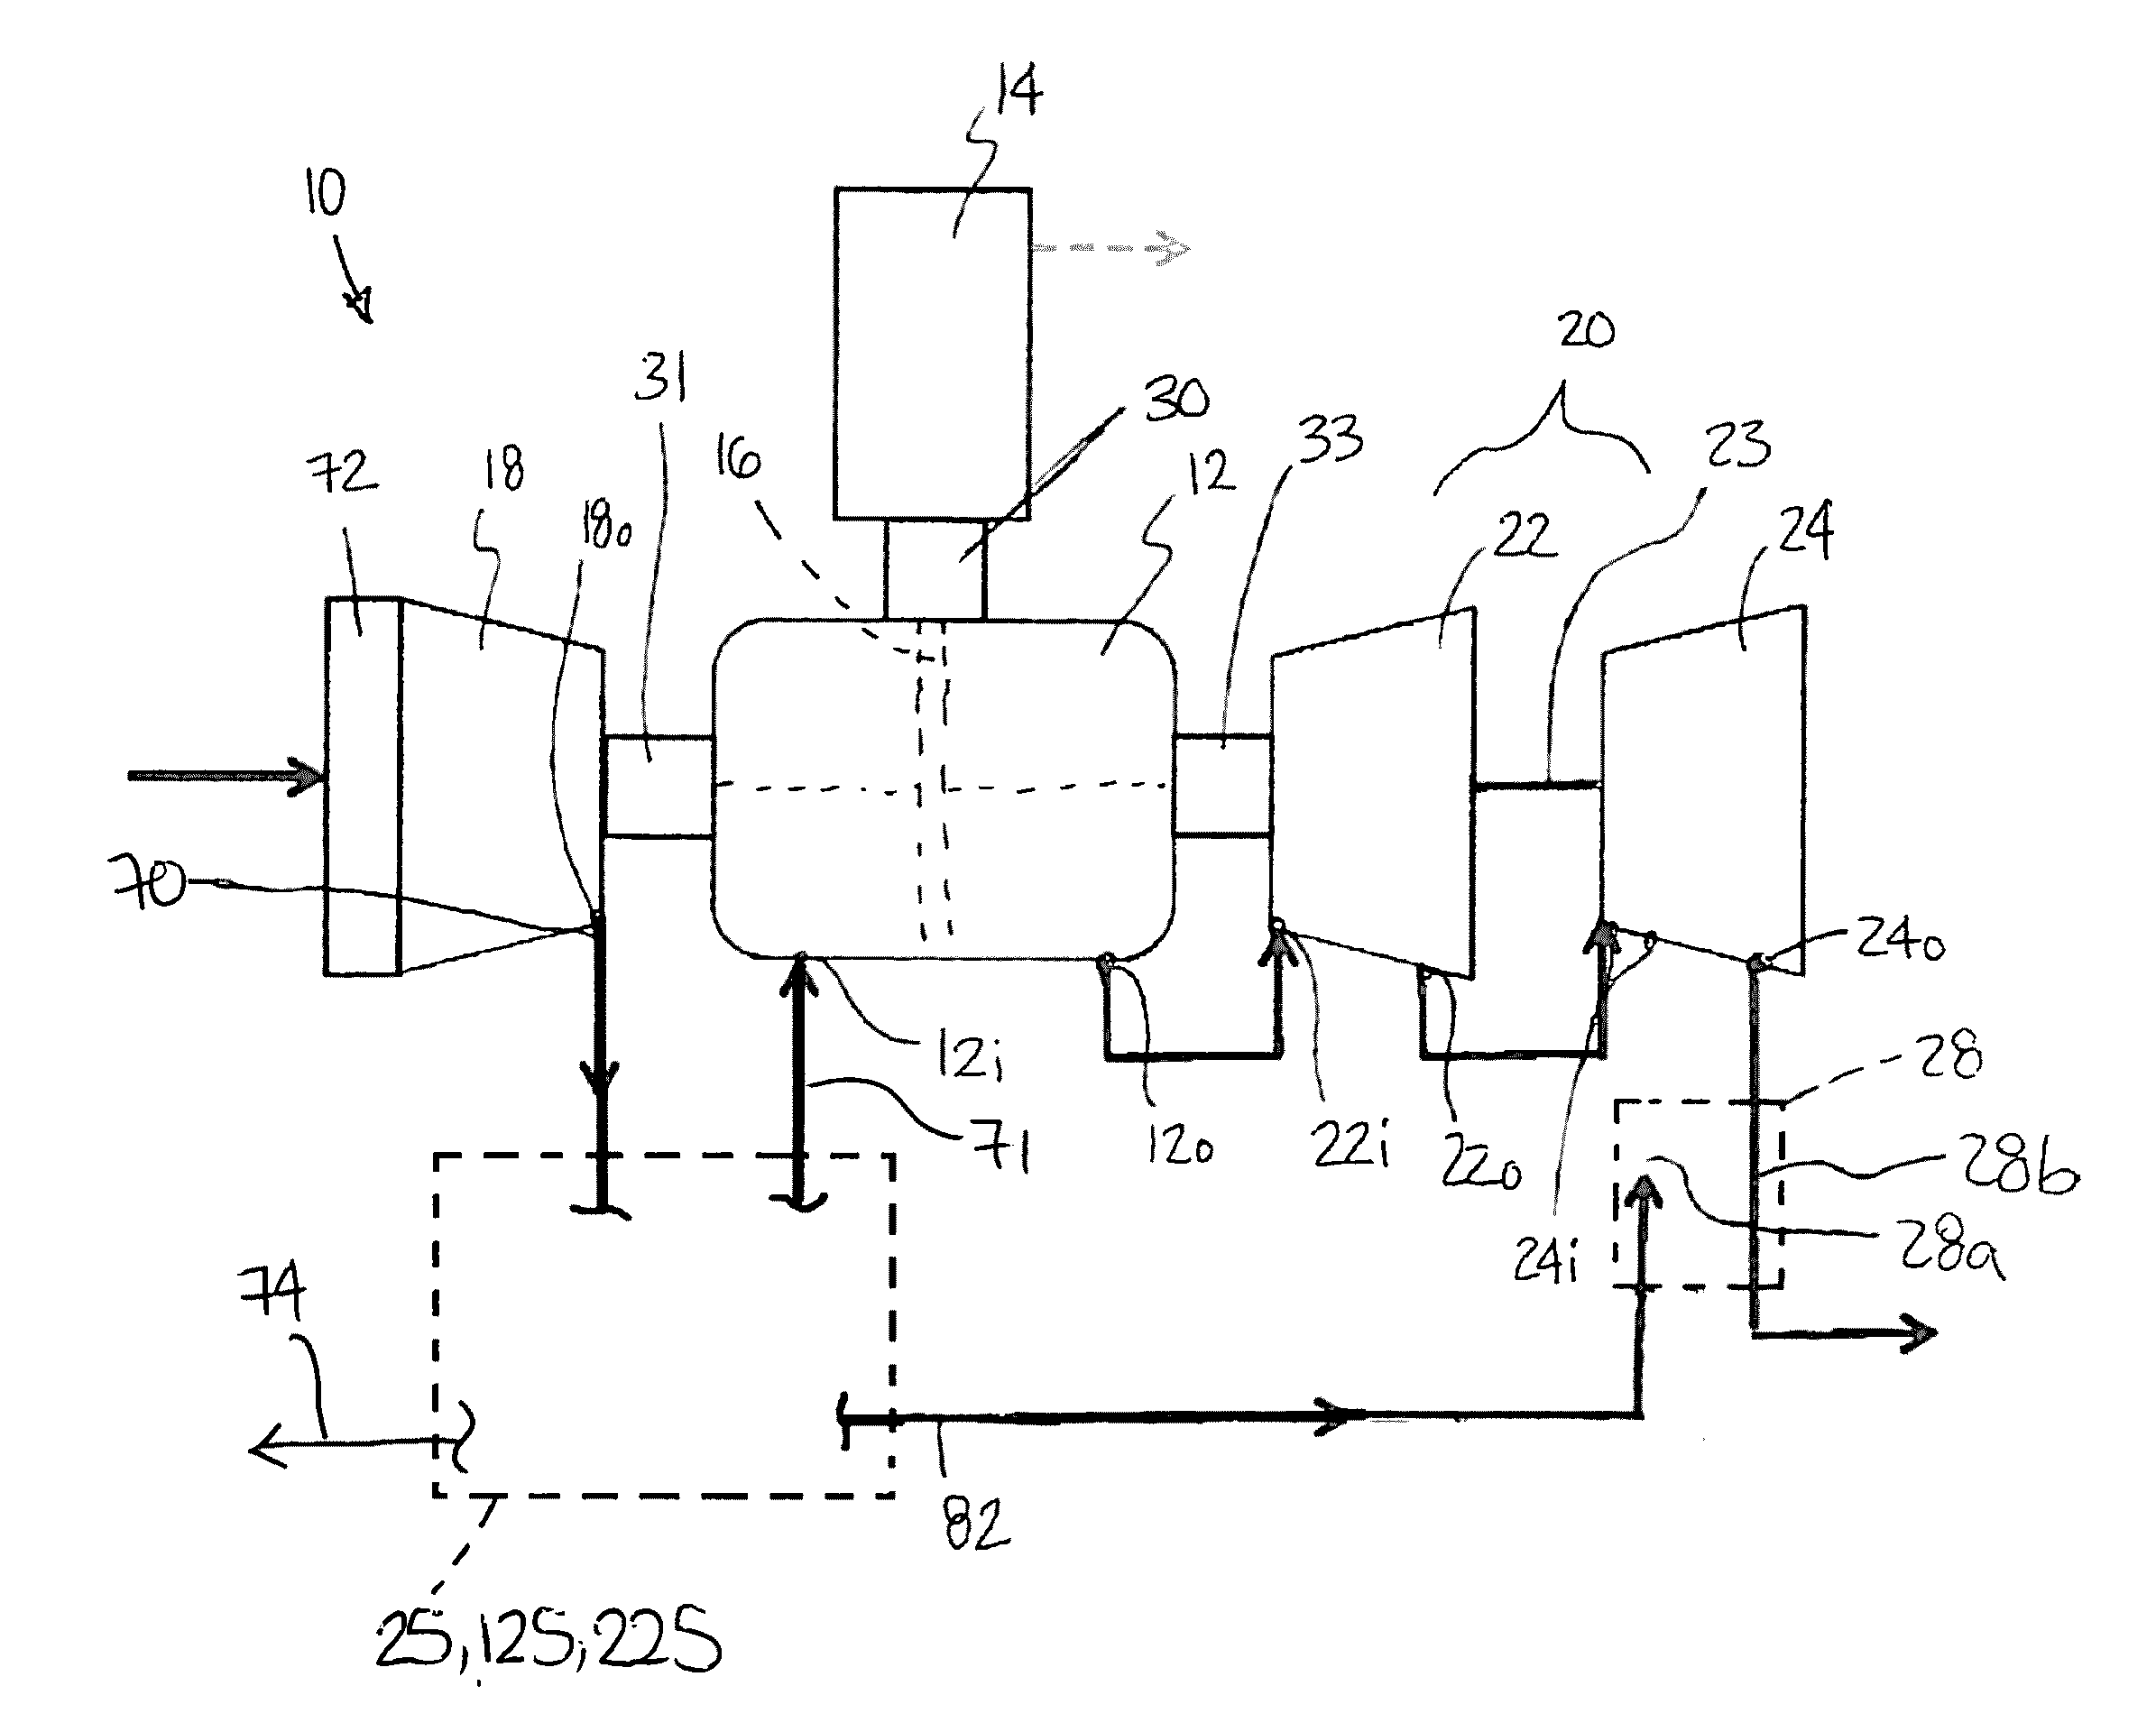 Compound engine assembly with direct drive of generator